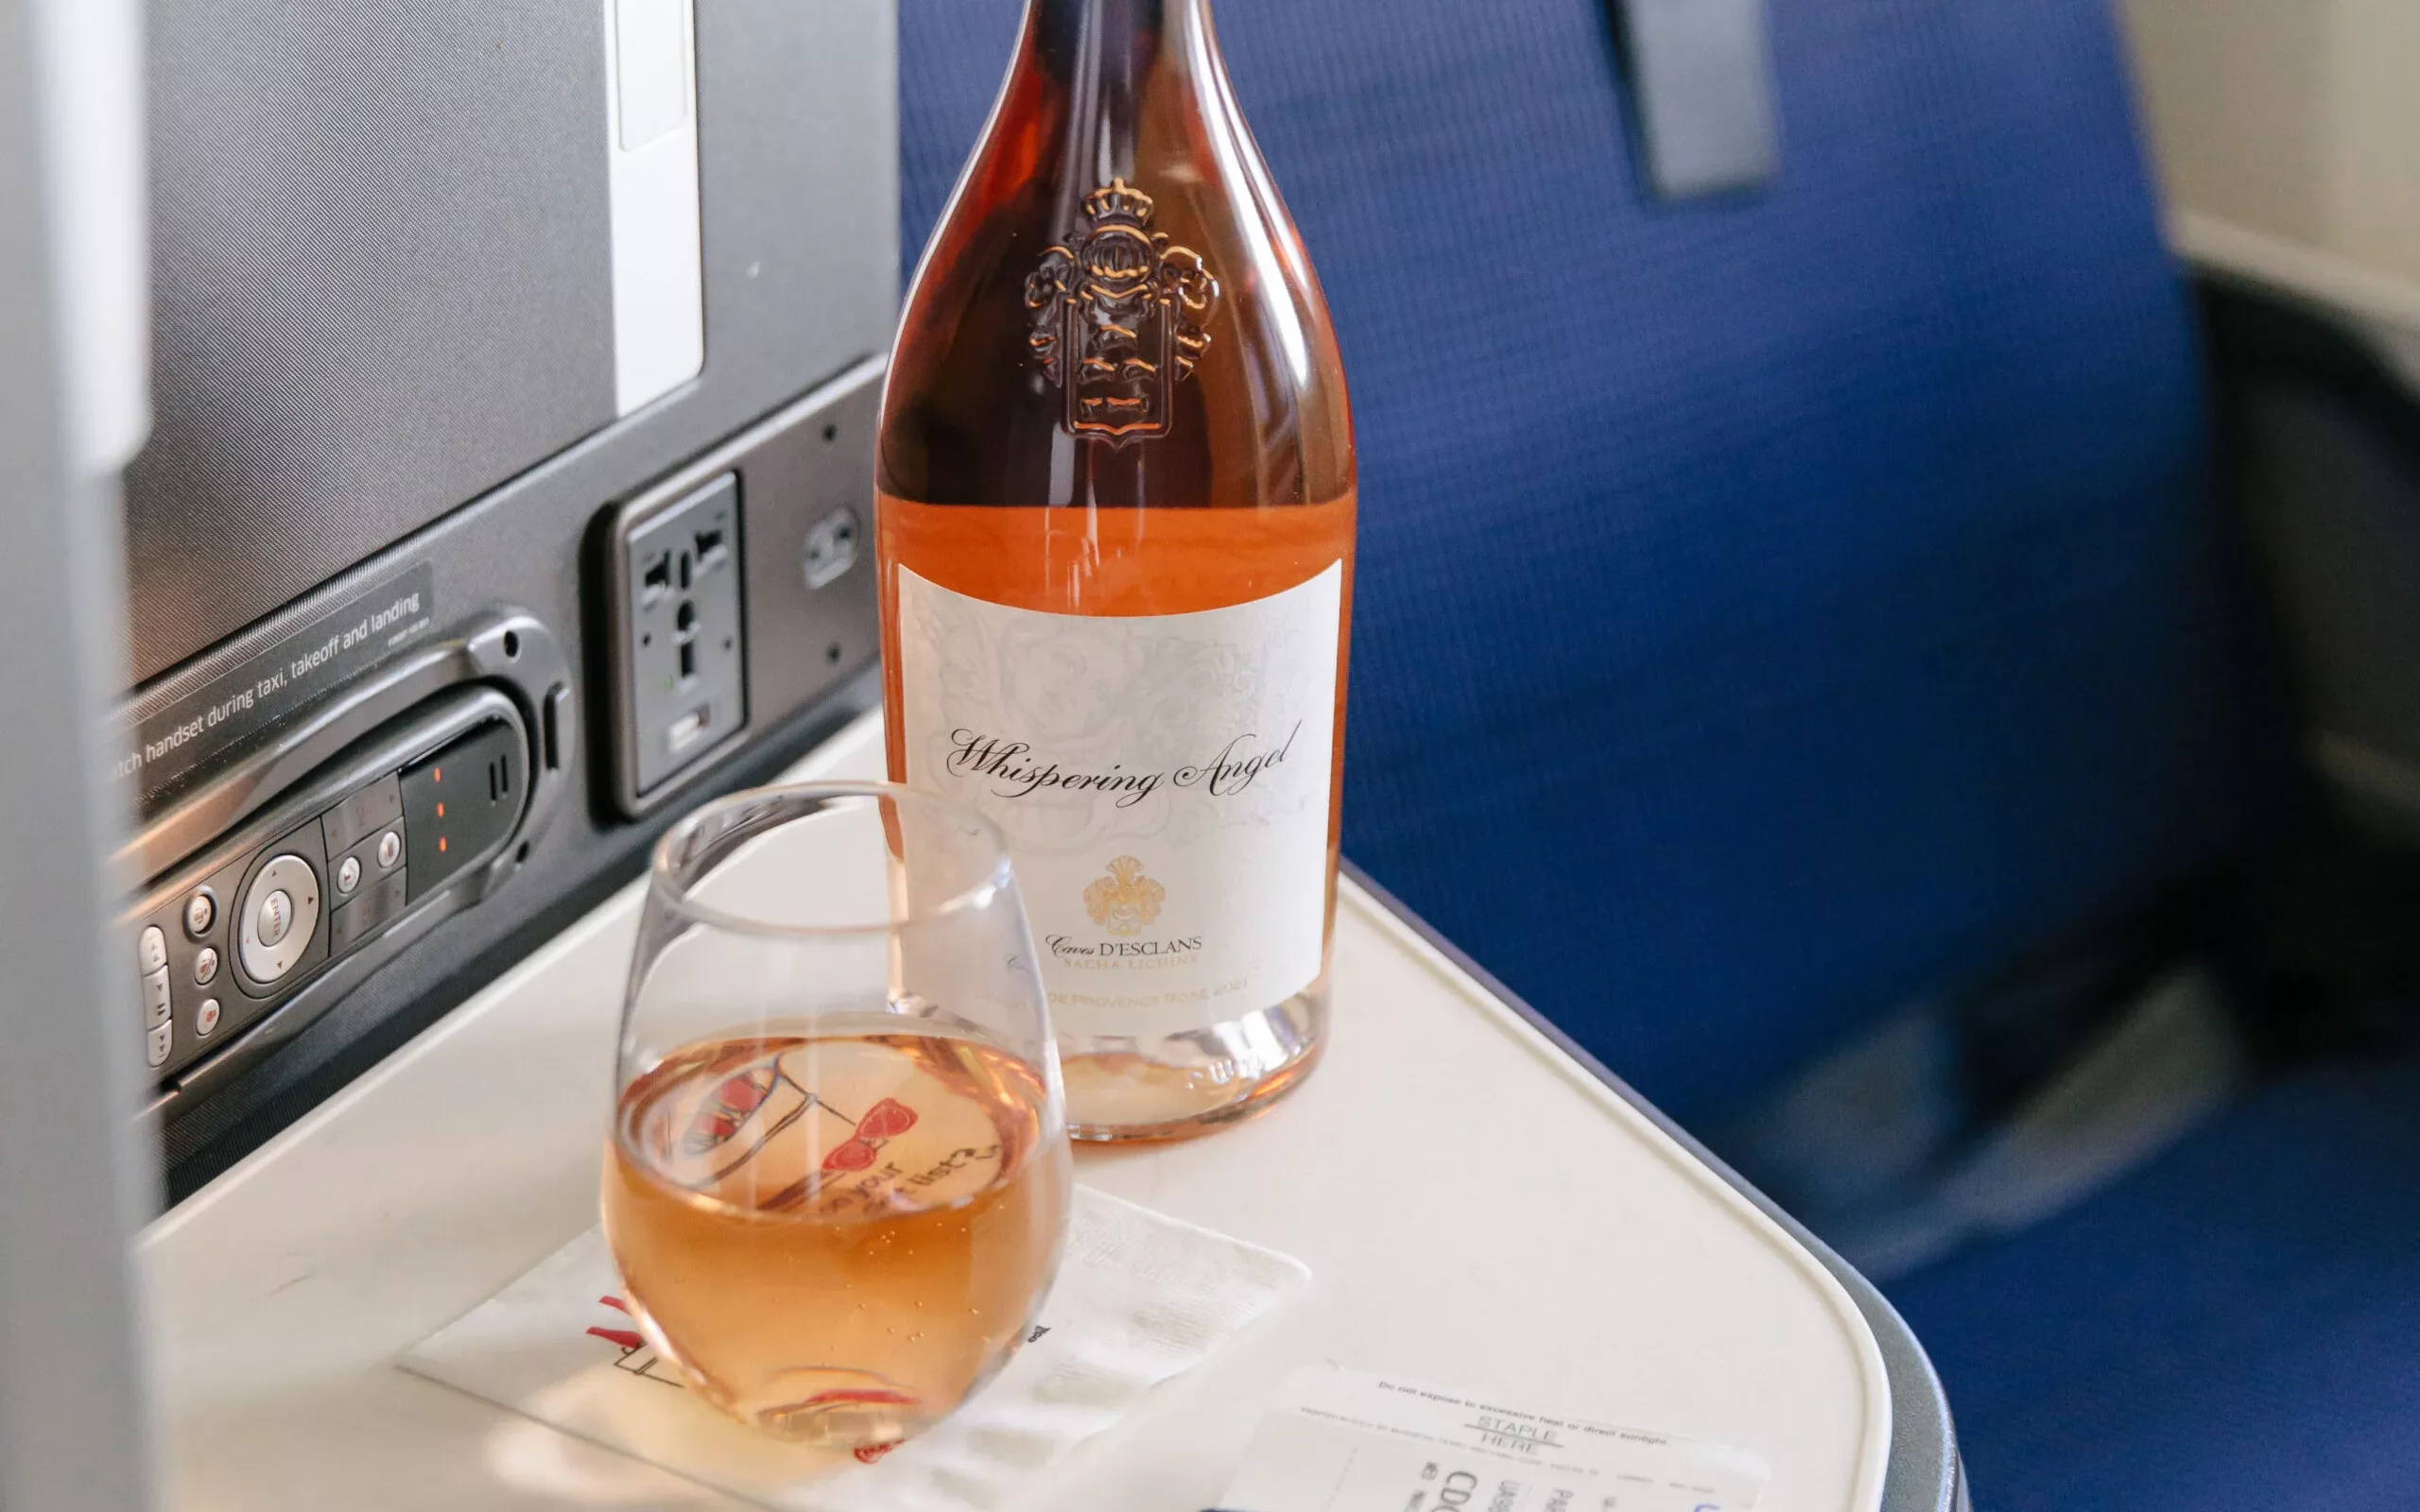 United is serving Whispering Angel in its Polaris Business Class